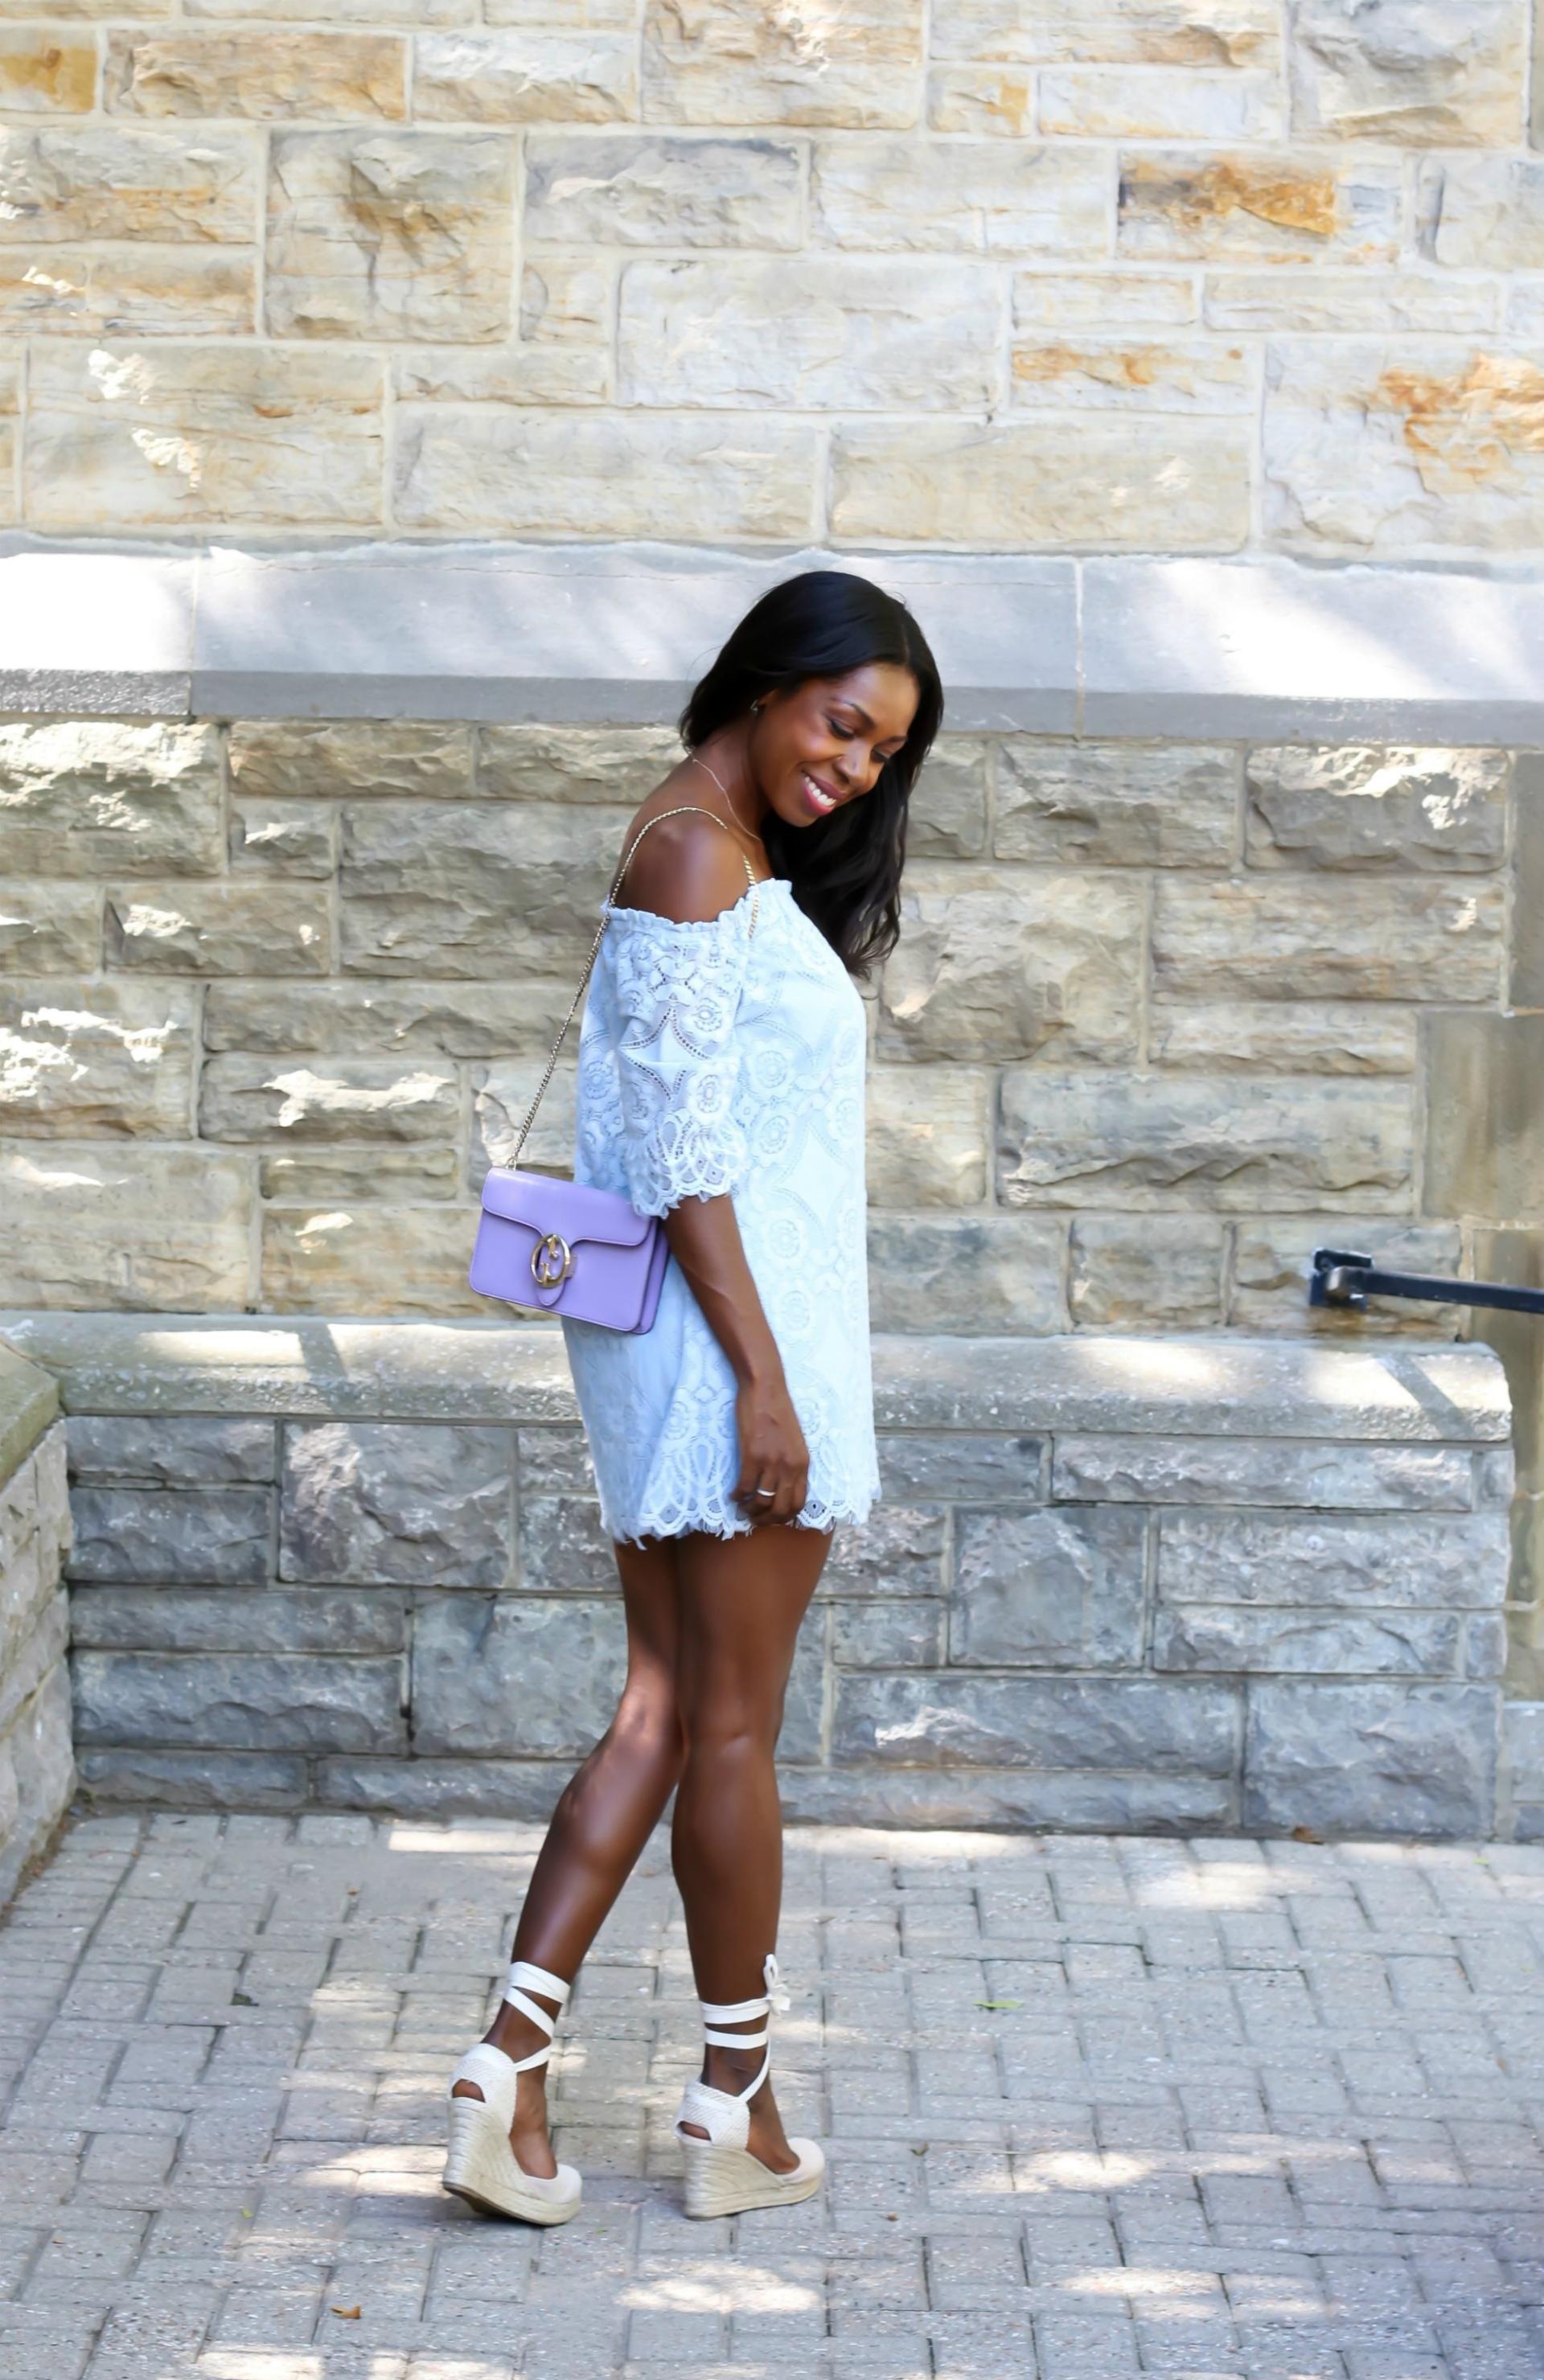 Having a blue lace moment in the most perfect blue lace off-the-shoulder dress